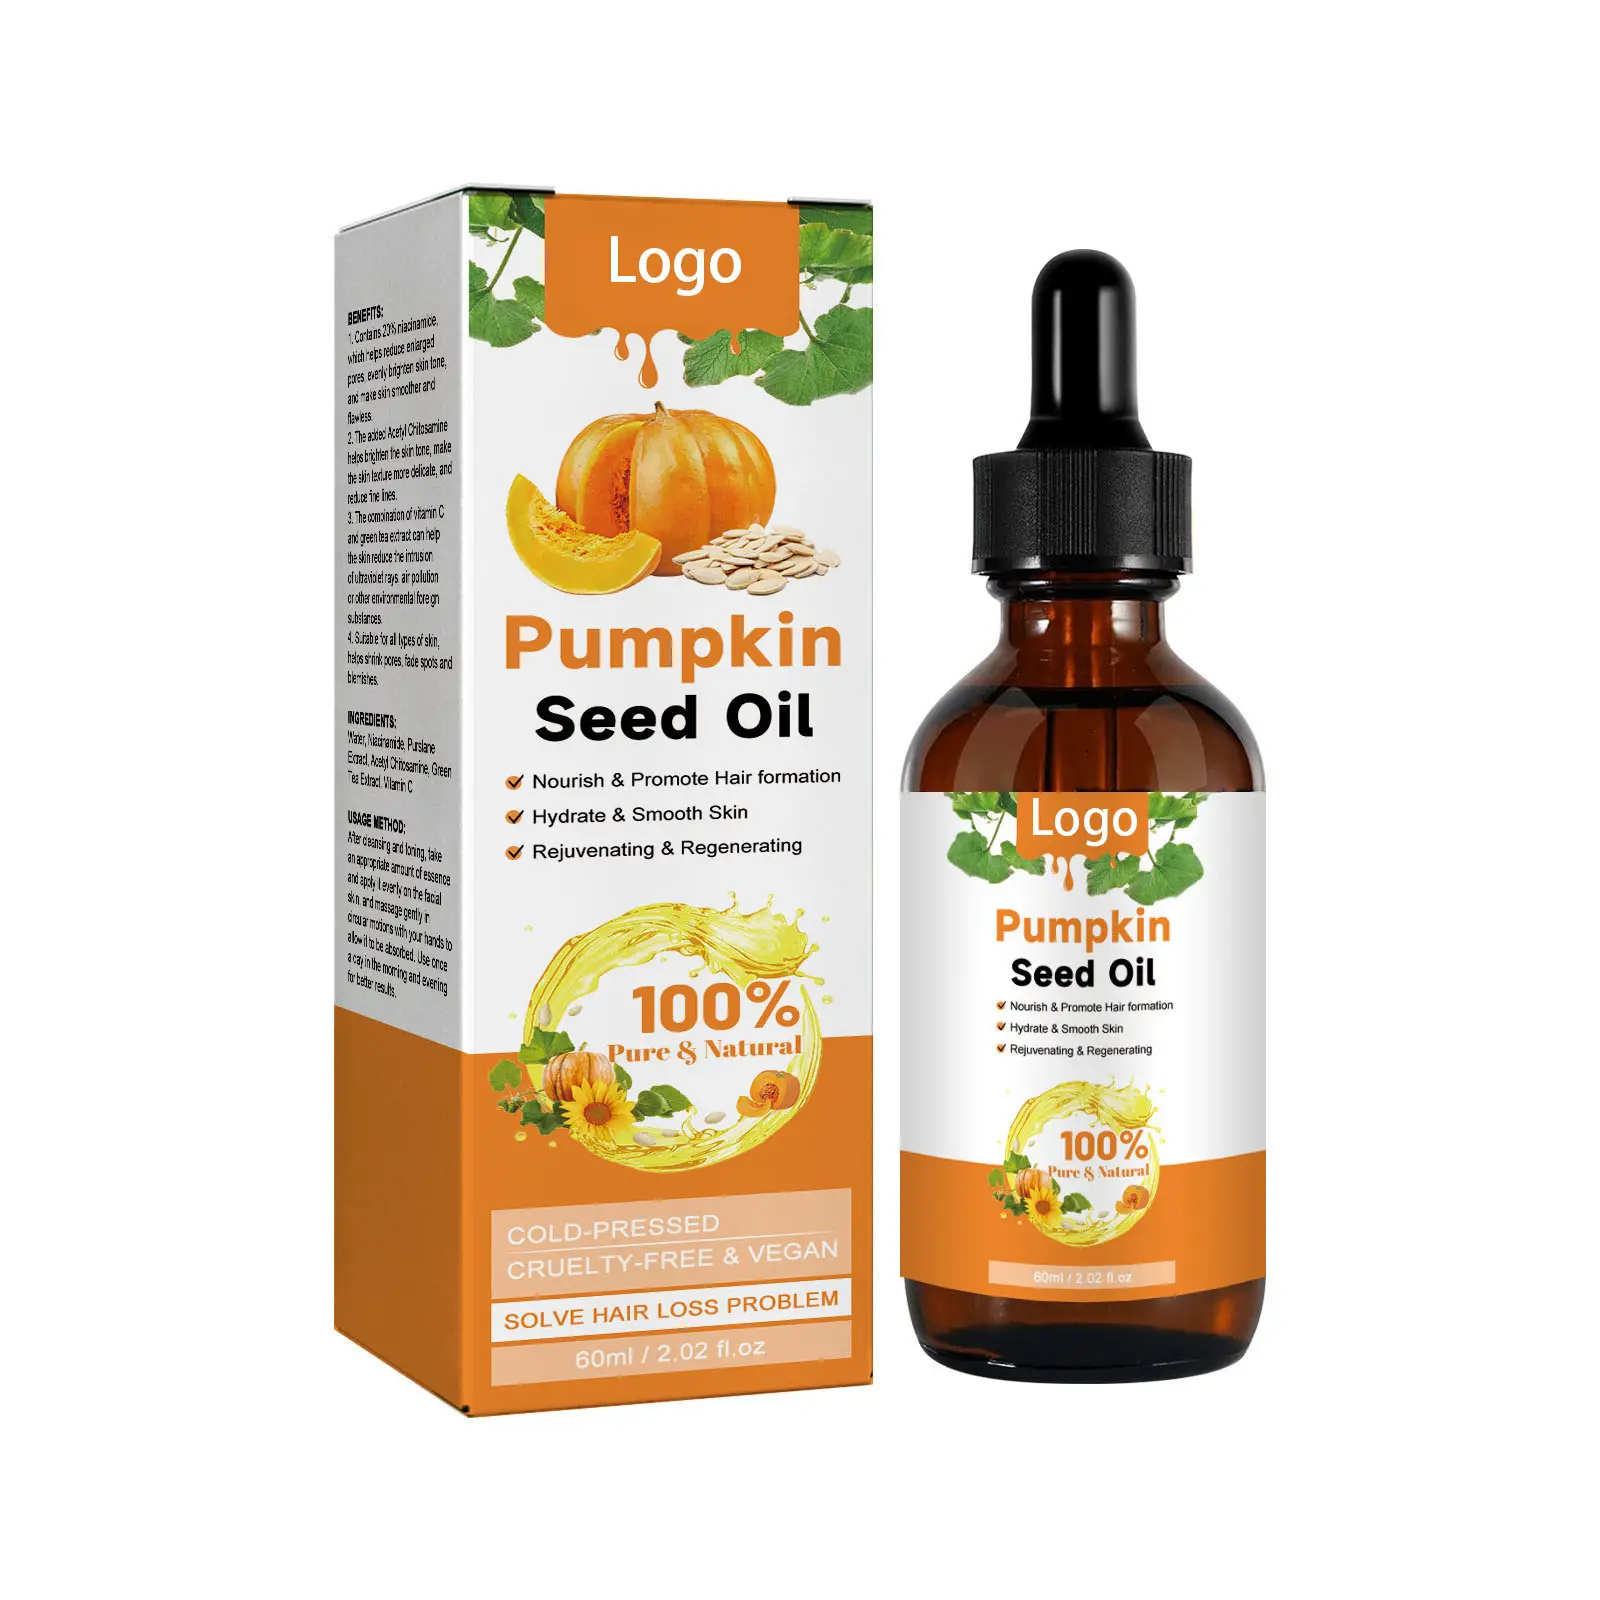 100% Pure Cold Pressed Moisturizer Smooth Skin Organic Pumpkin Seed Oil Boost Hair Growth for Eyelashes,Eyebrows & Hair